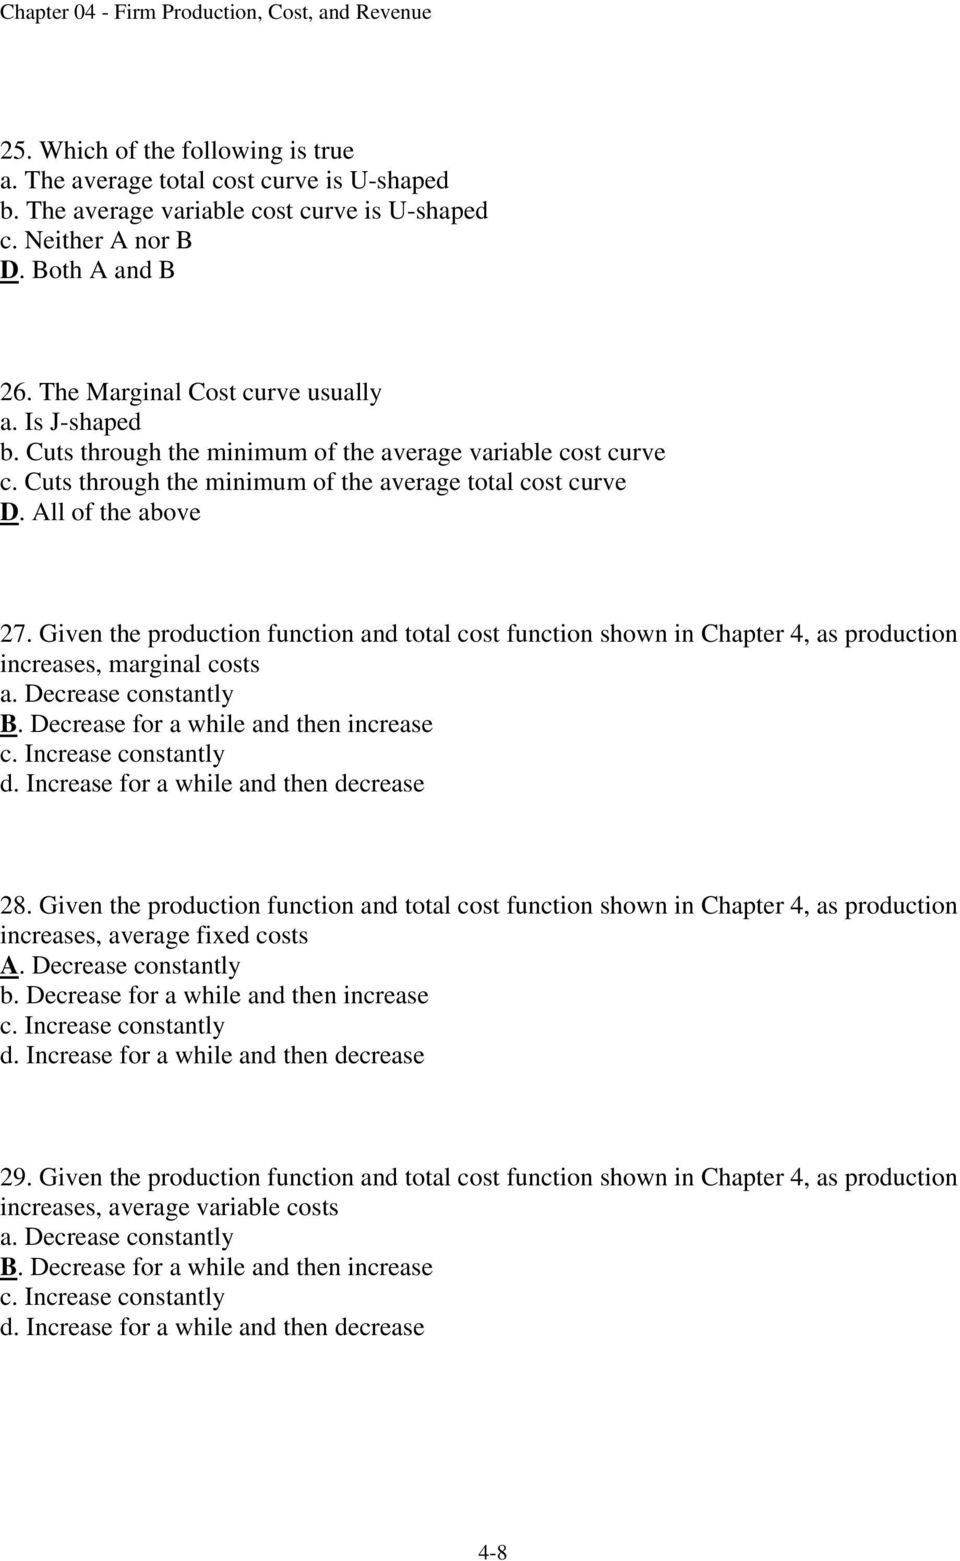 Given the production function and total cost function shown in Chapter 4, as production increases, marginal costs a. Decrease constantly B. Decrease for a while and then increase c.